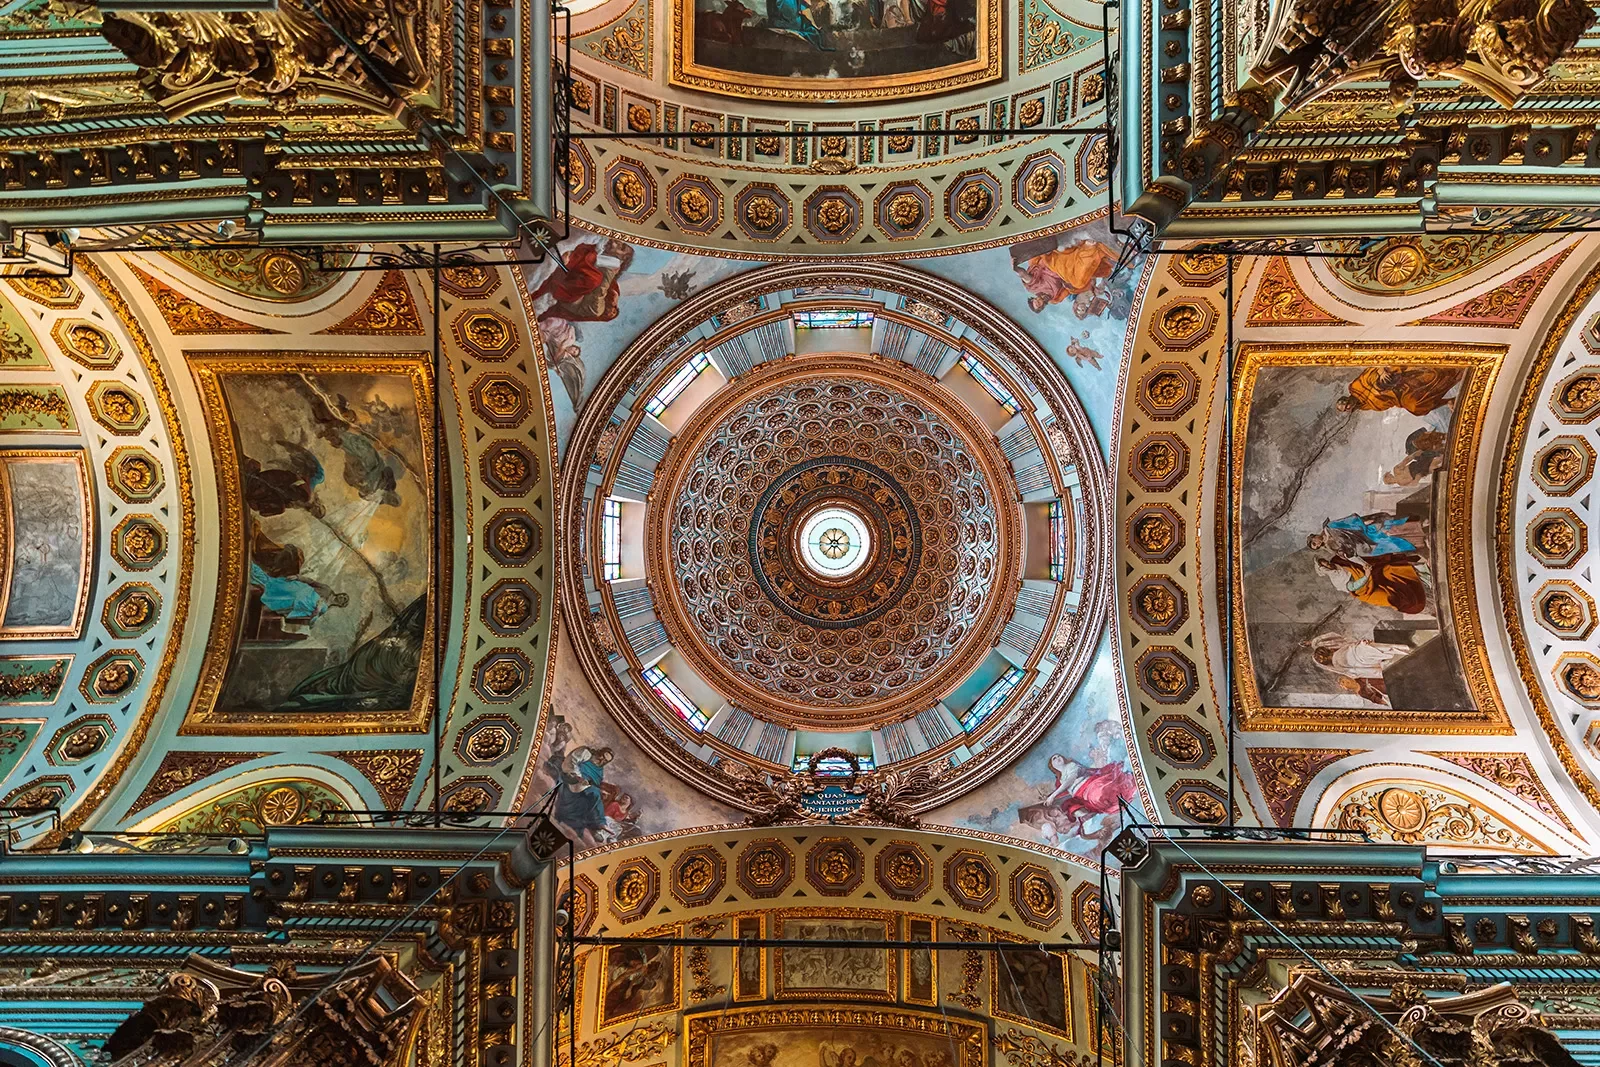 Shot of ceiling in domed church, mosaics and art on ceiling.